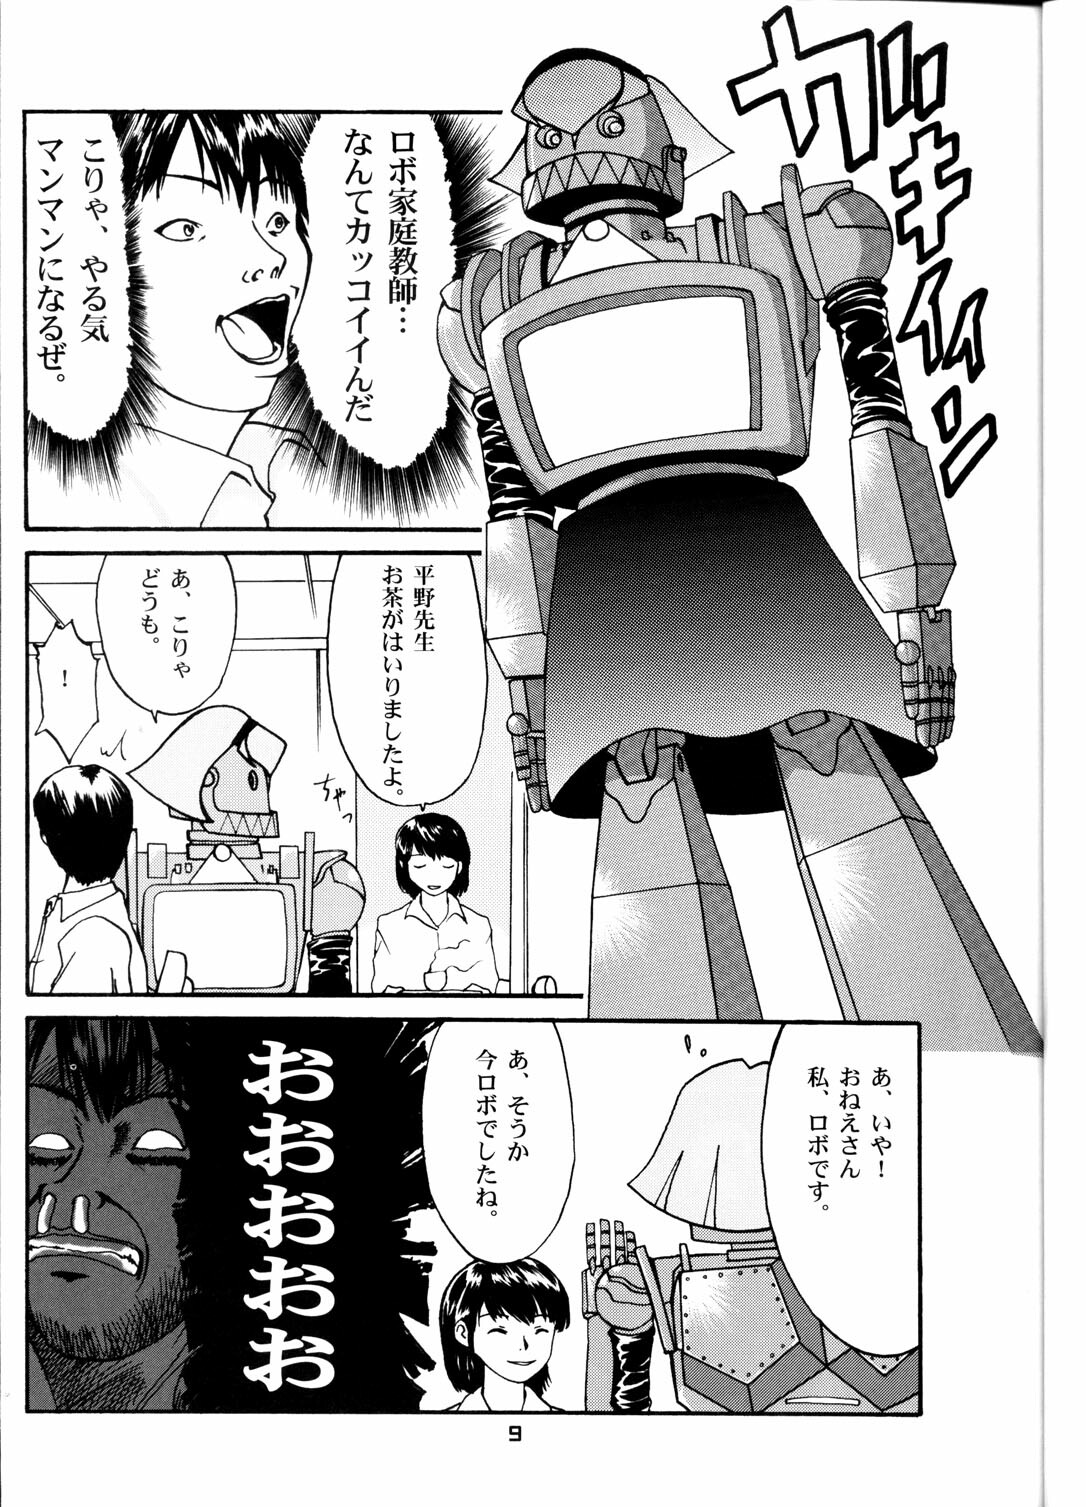 (C58) [T2 UNIT (Various)] OH! Robo Musume Chuushuugou! (Various) page 9 full